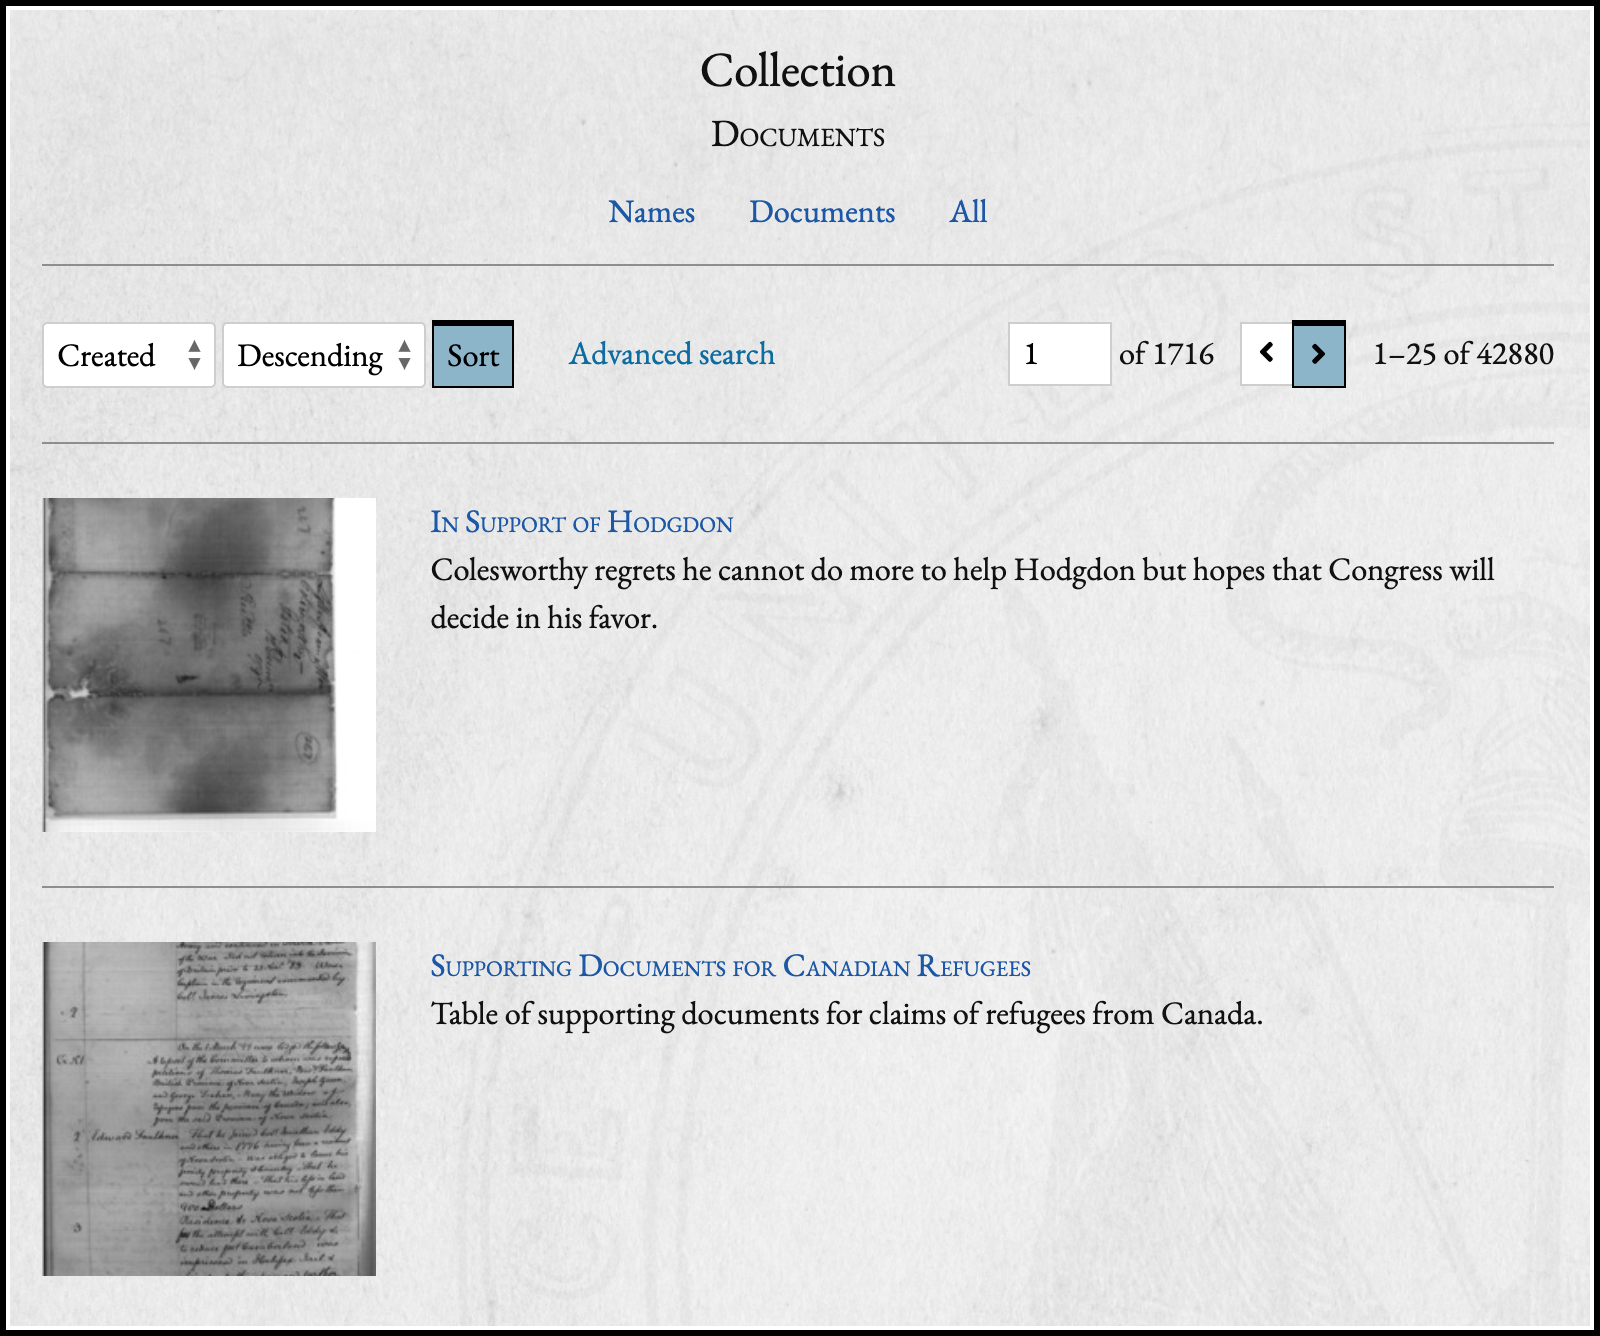 Browse page for Documents collection showing two items with large thumbnails